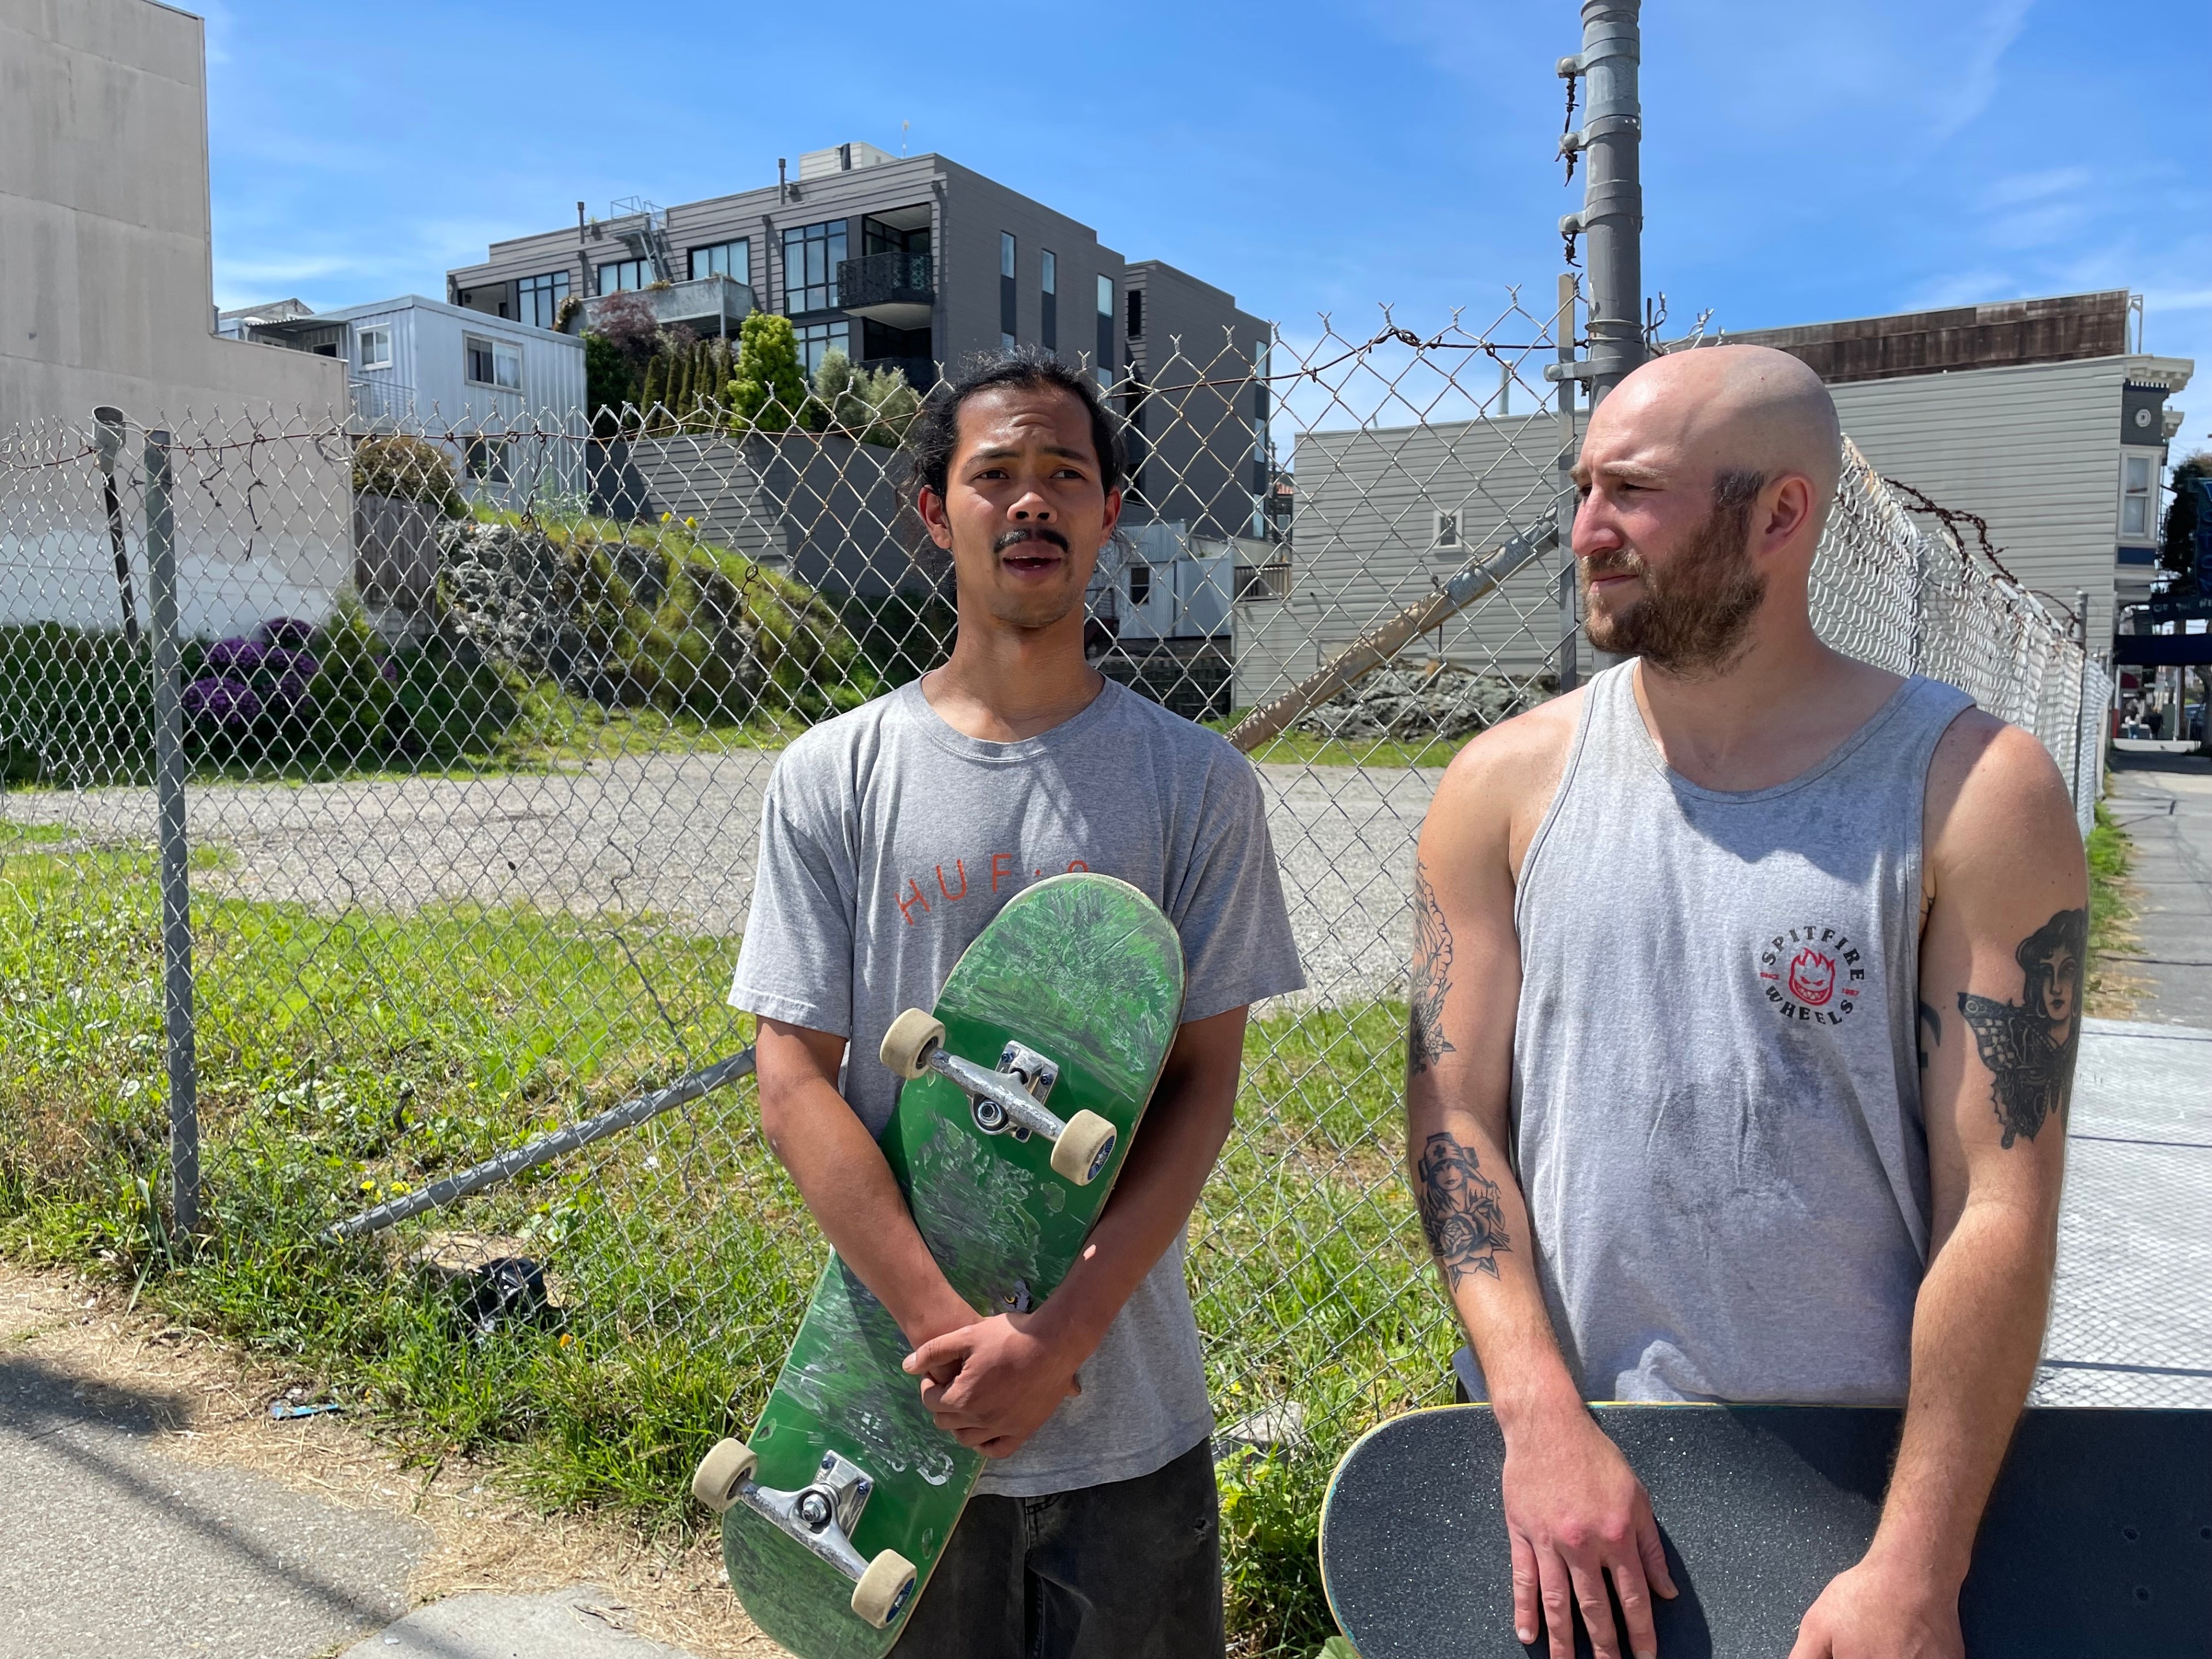 Two men stand holding skateboards in a photo.